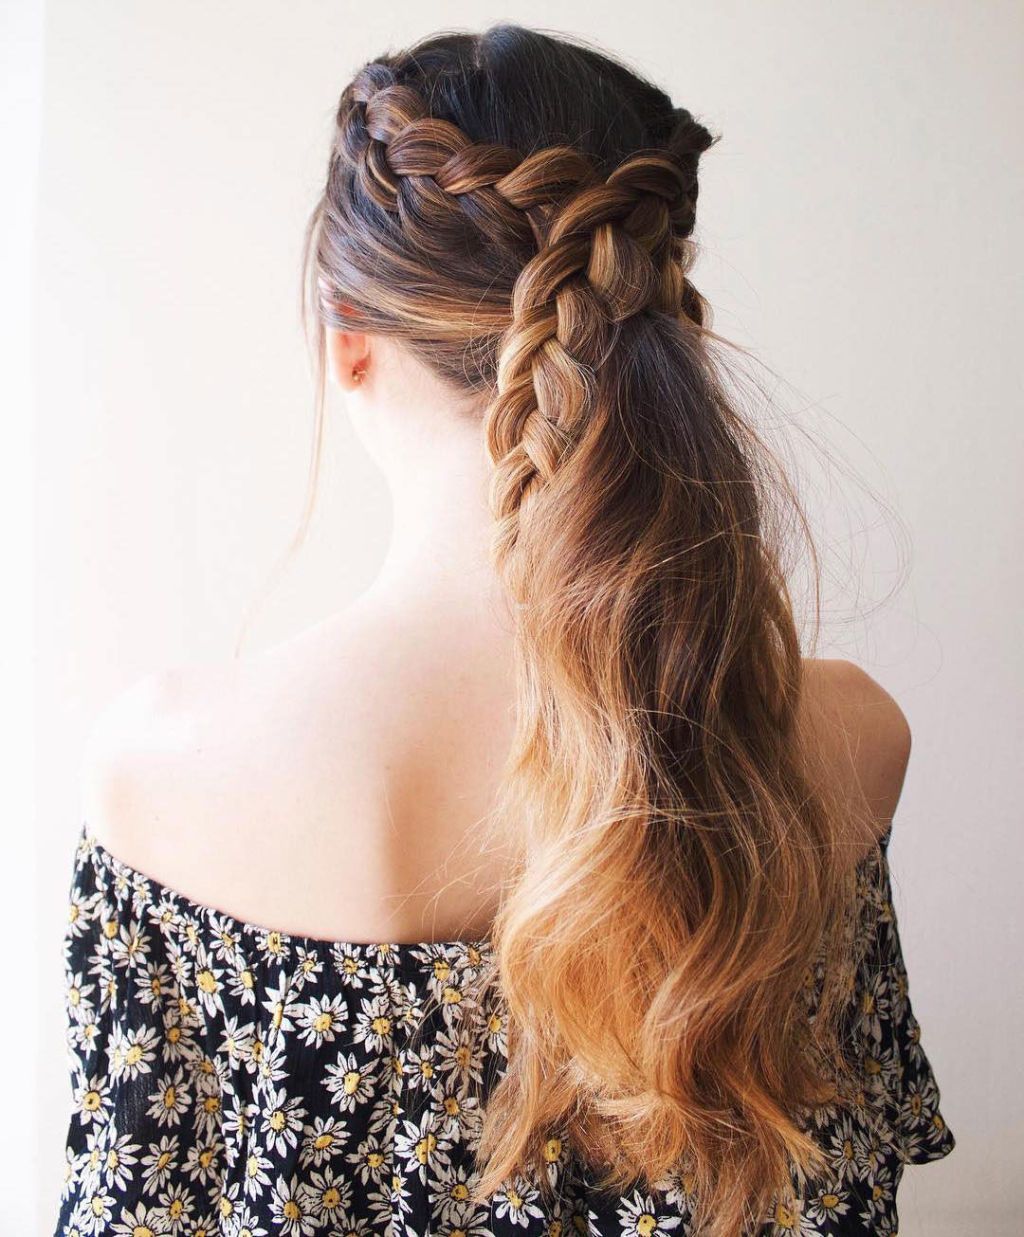 How To Do An Easy Side Braid Ponytail | Beauty | Poor Little It Girl